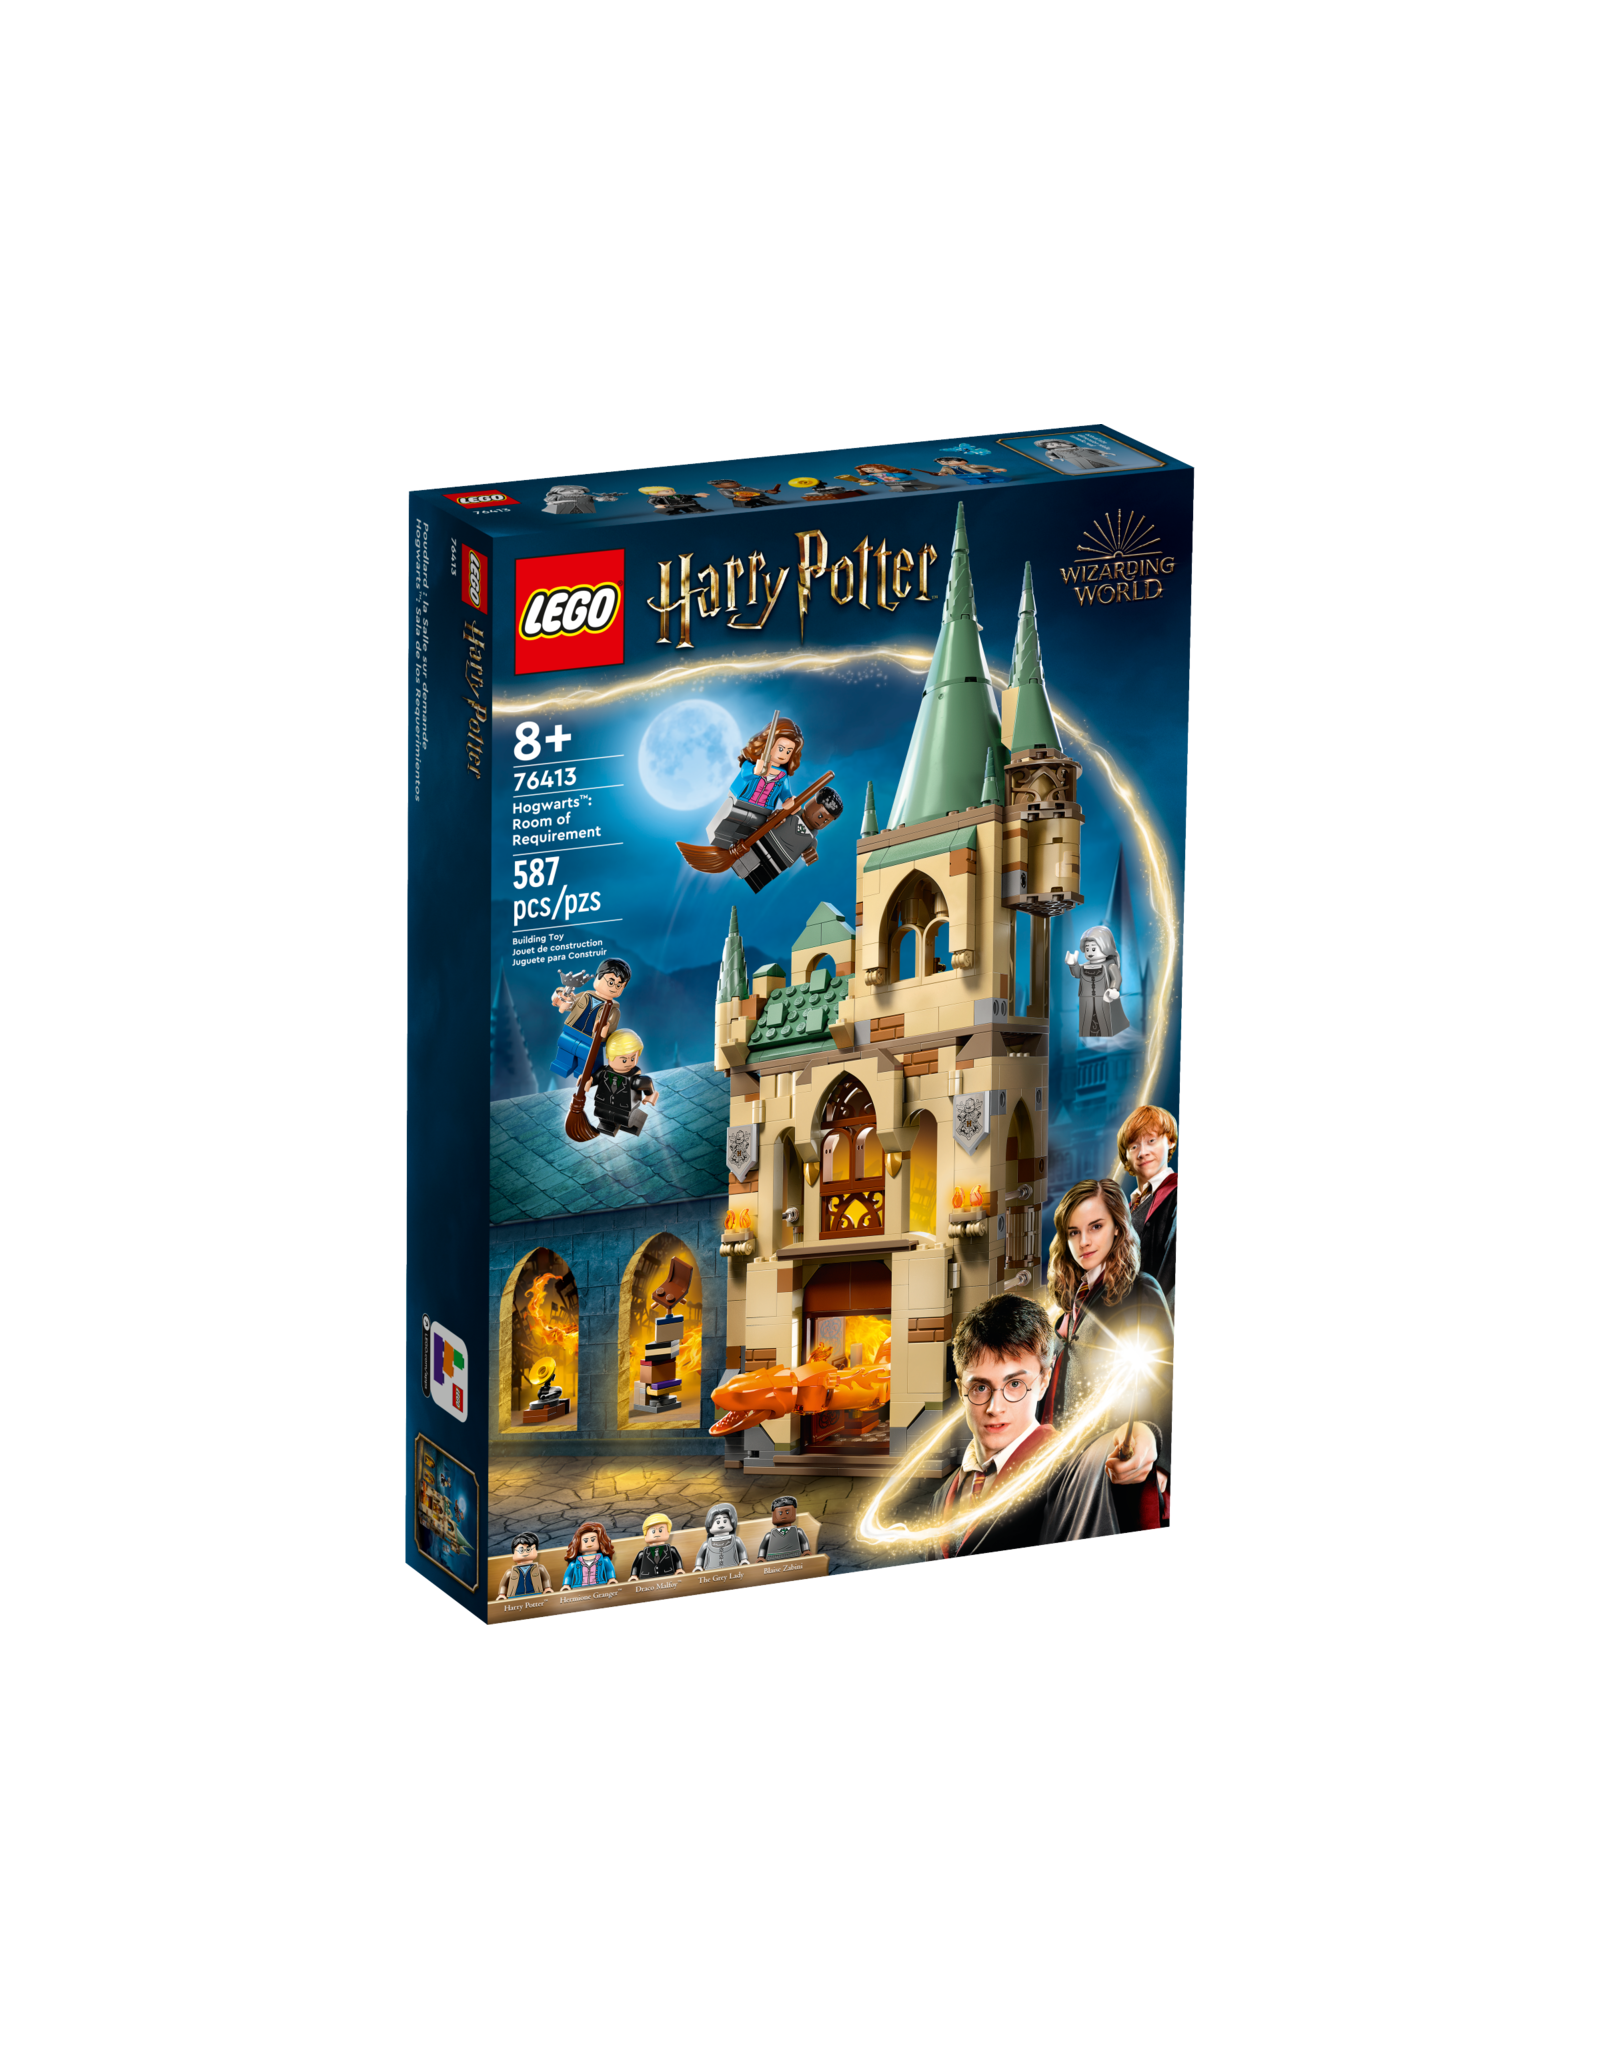 LEGO Harry Potter 76413 Hogwarts Room of Requirement